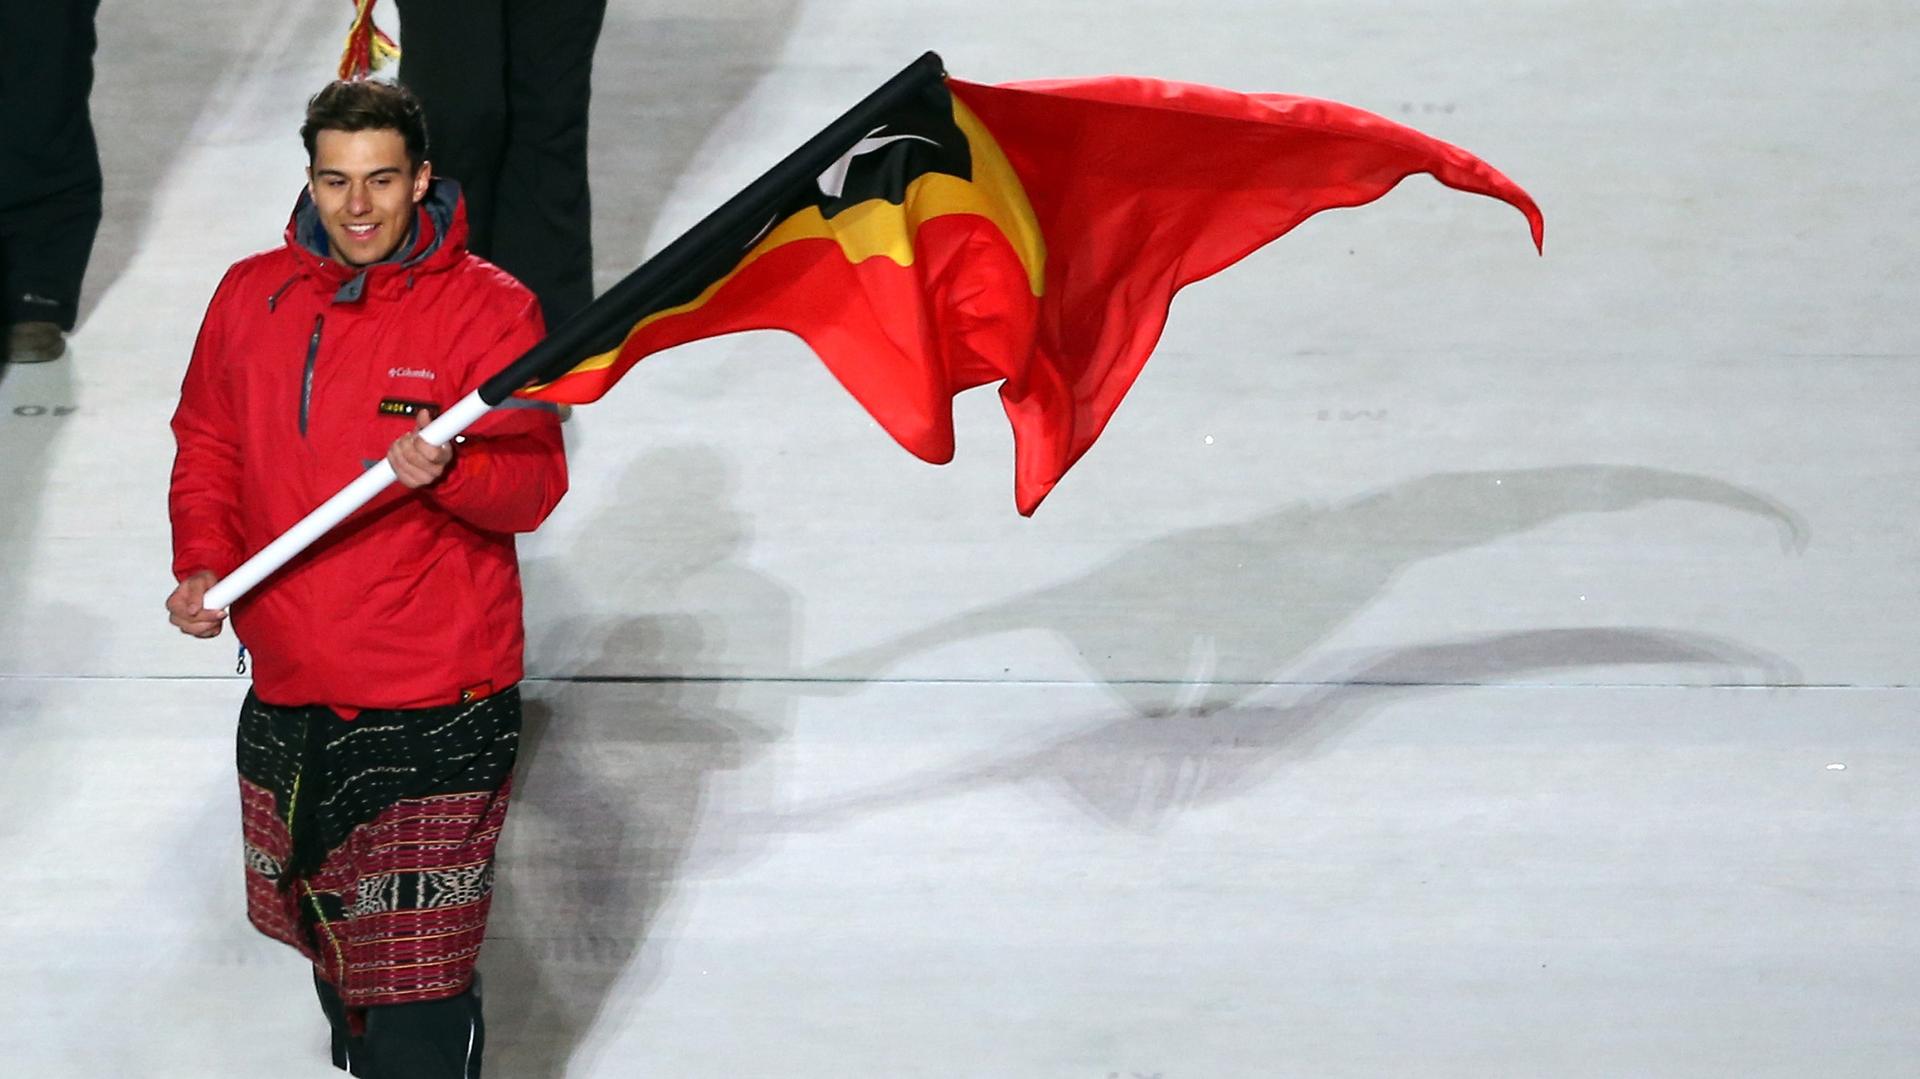 Skier Yohan Goncalves Goutt of the Timor-Leste Olympic team carries his country's flag during the Opening Ceremony of the Sochi 2014 Winter Olympics.